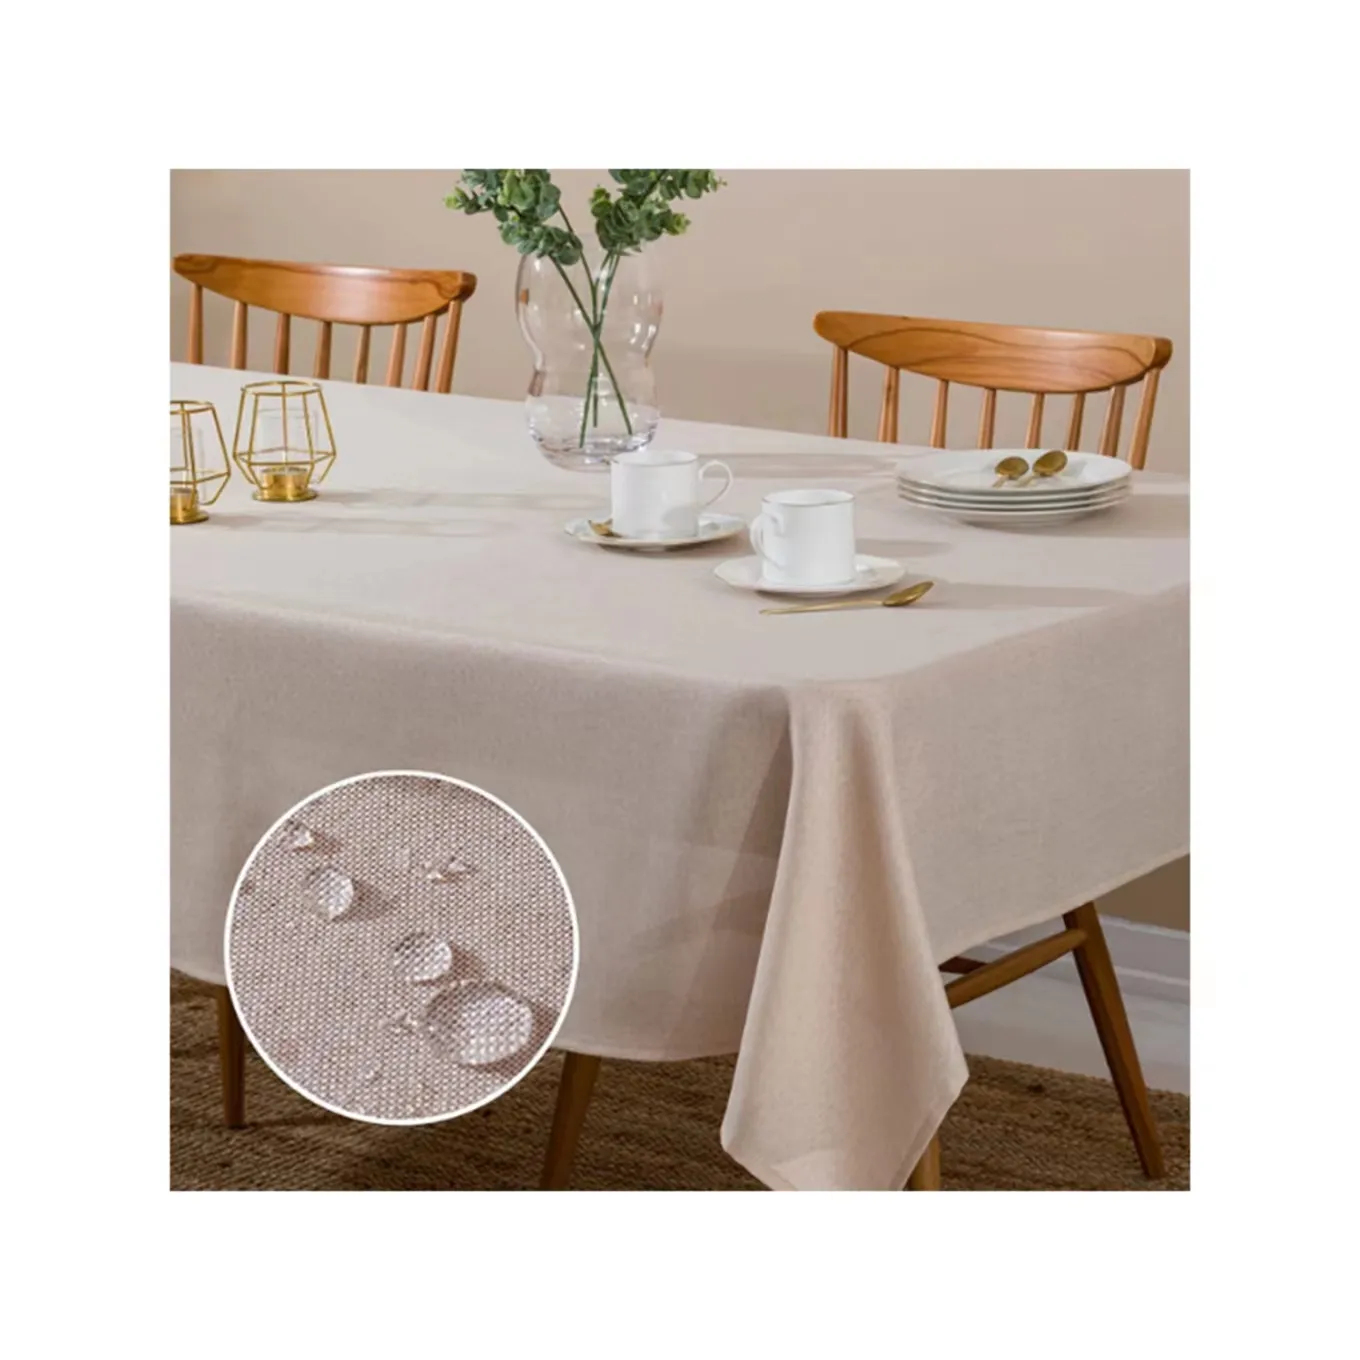 Tablecloth Faux Linen water proof Square Tablecloth Table Cover for Kitchen Dining Room Tabletop Decoration CREAM COLOR